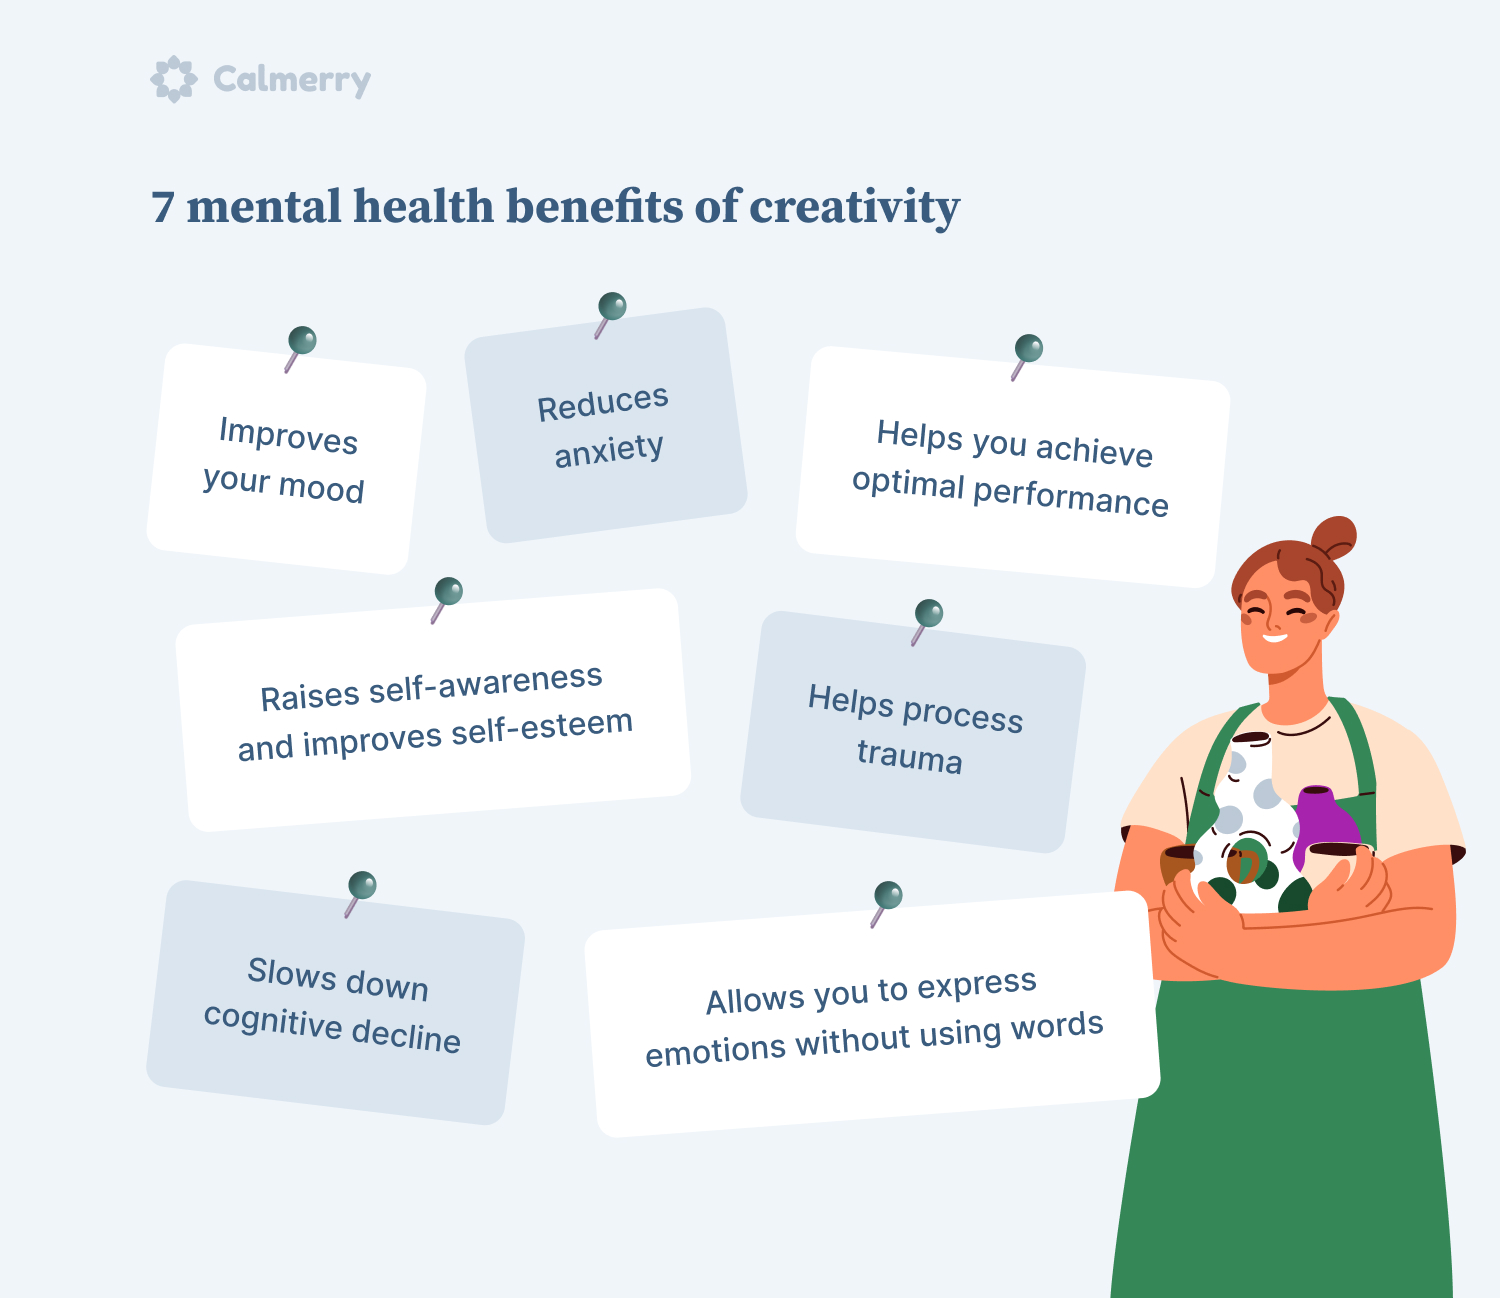 Table with 7 mental health benefits of creativity